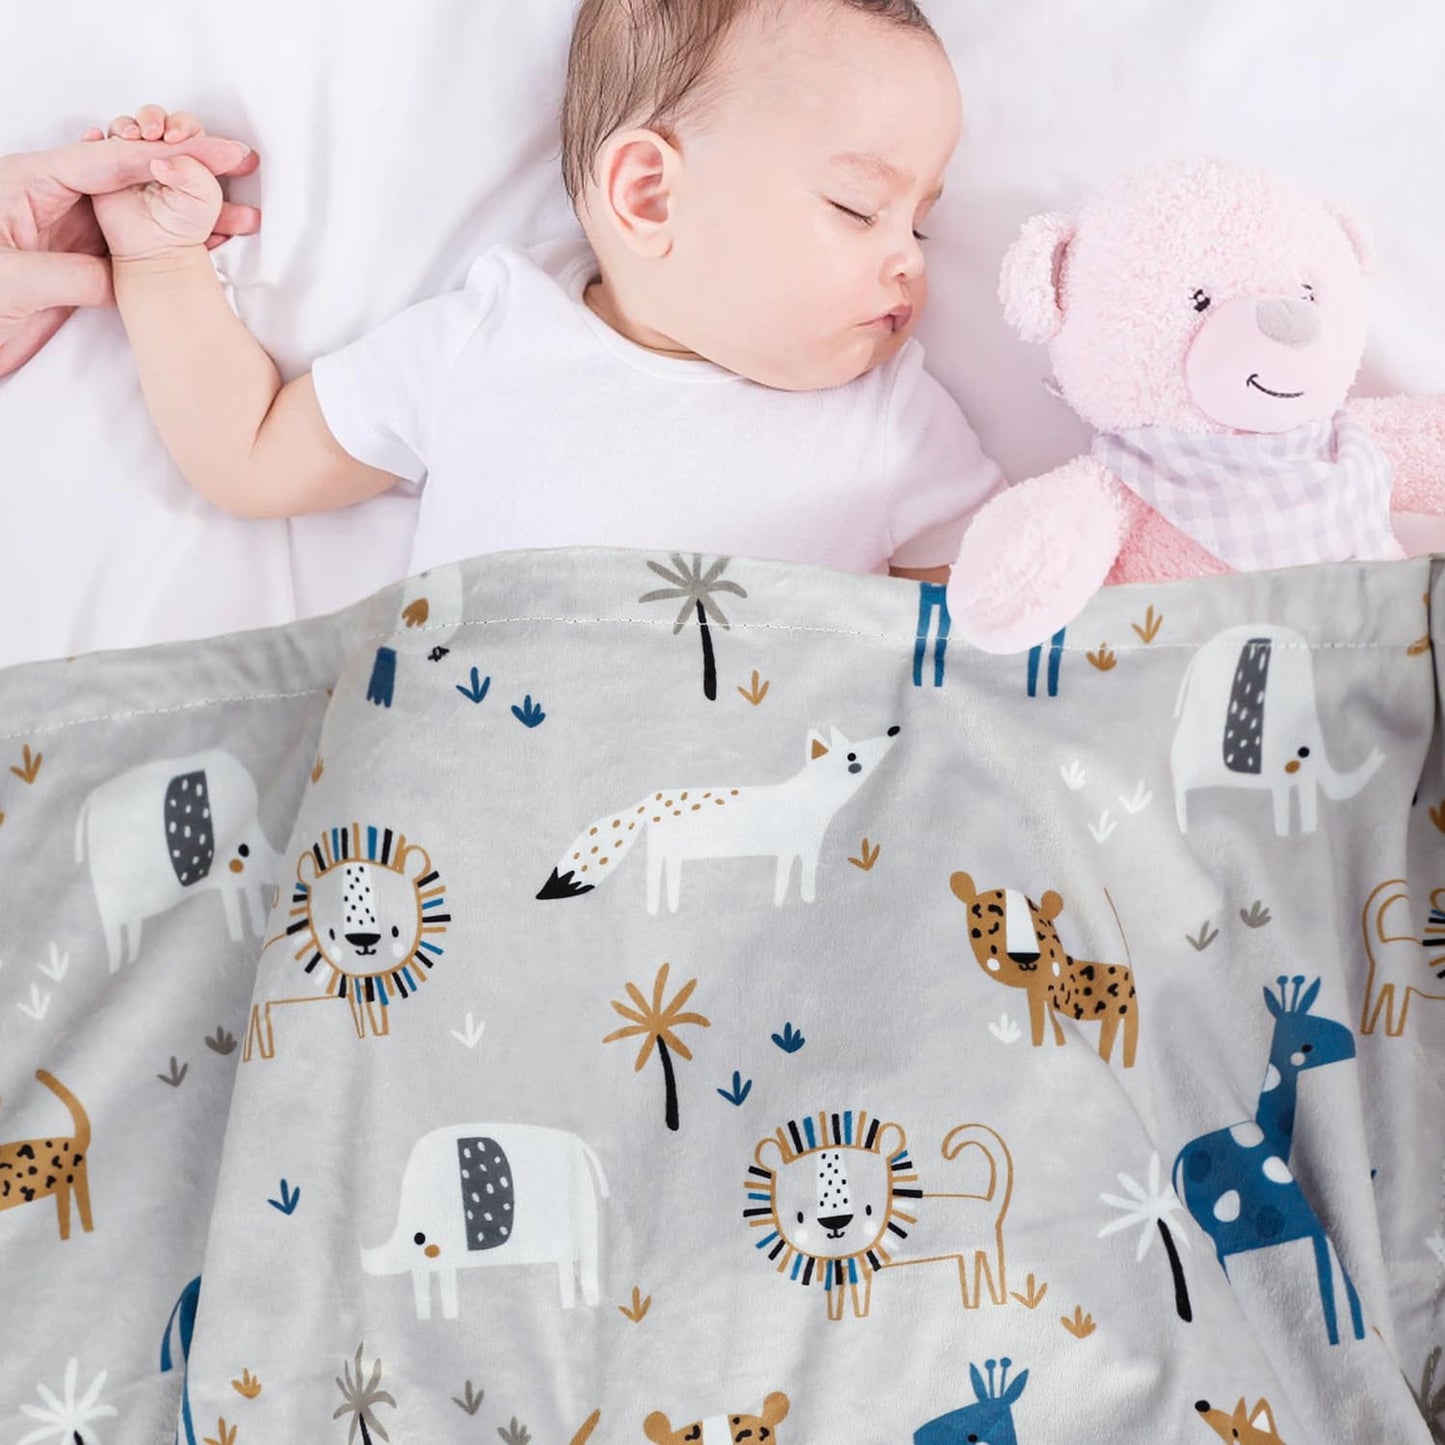 BORITAR Unisex Baby Blanket for Boys Girls Super Soft Minky with Double Layer Dotted Backing, Printed Snow Mountain Animals Nursery Bed Blankets for Stroller Crib Shower Gifts 30 x 40 Inch(75x100cm)